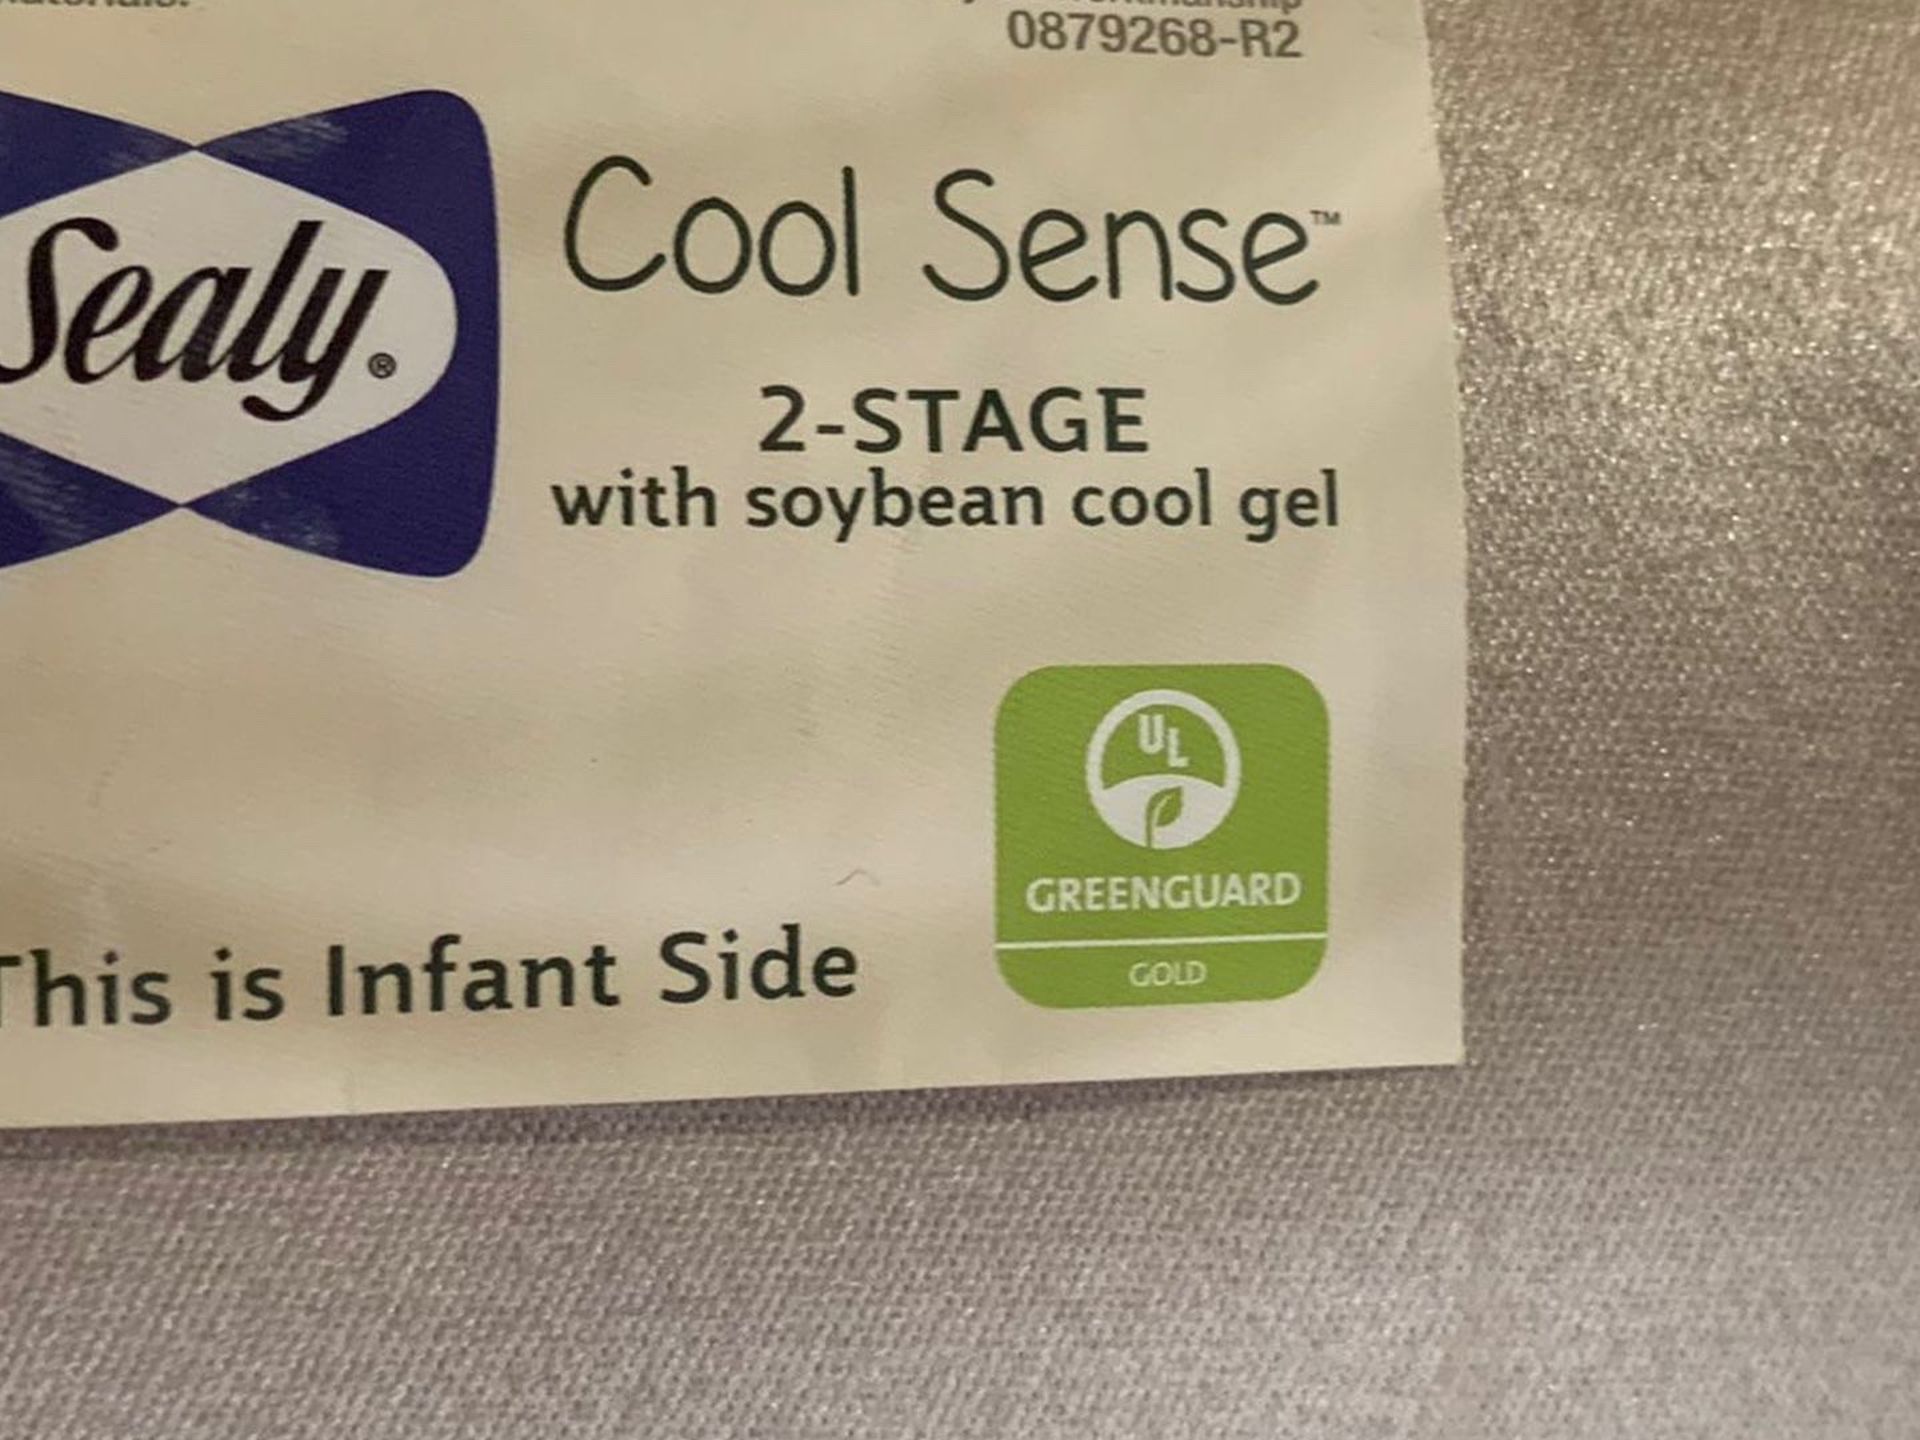 Sealy Cooling Infant/toddler mattress